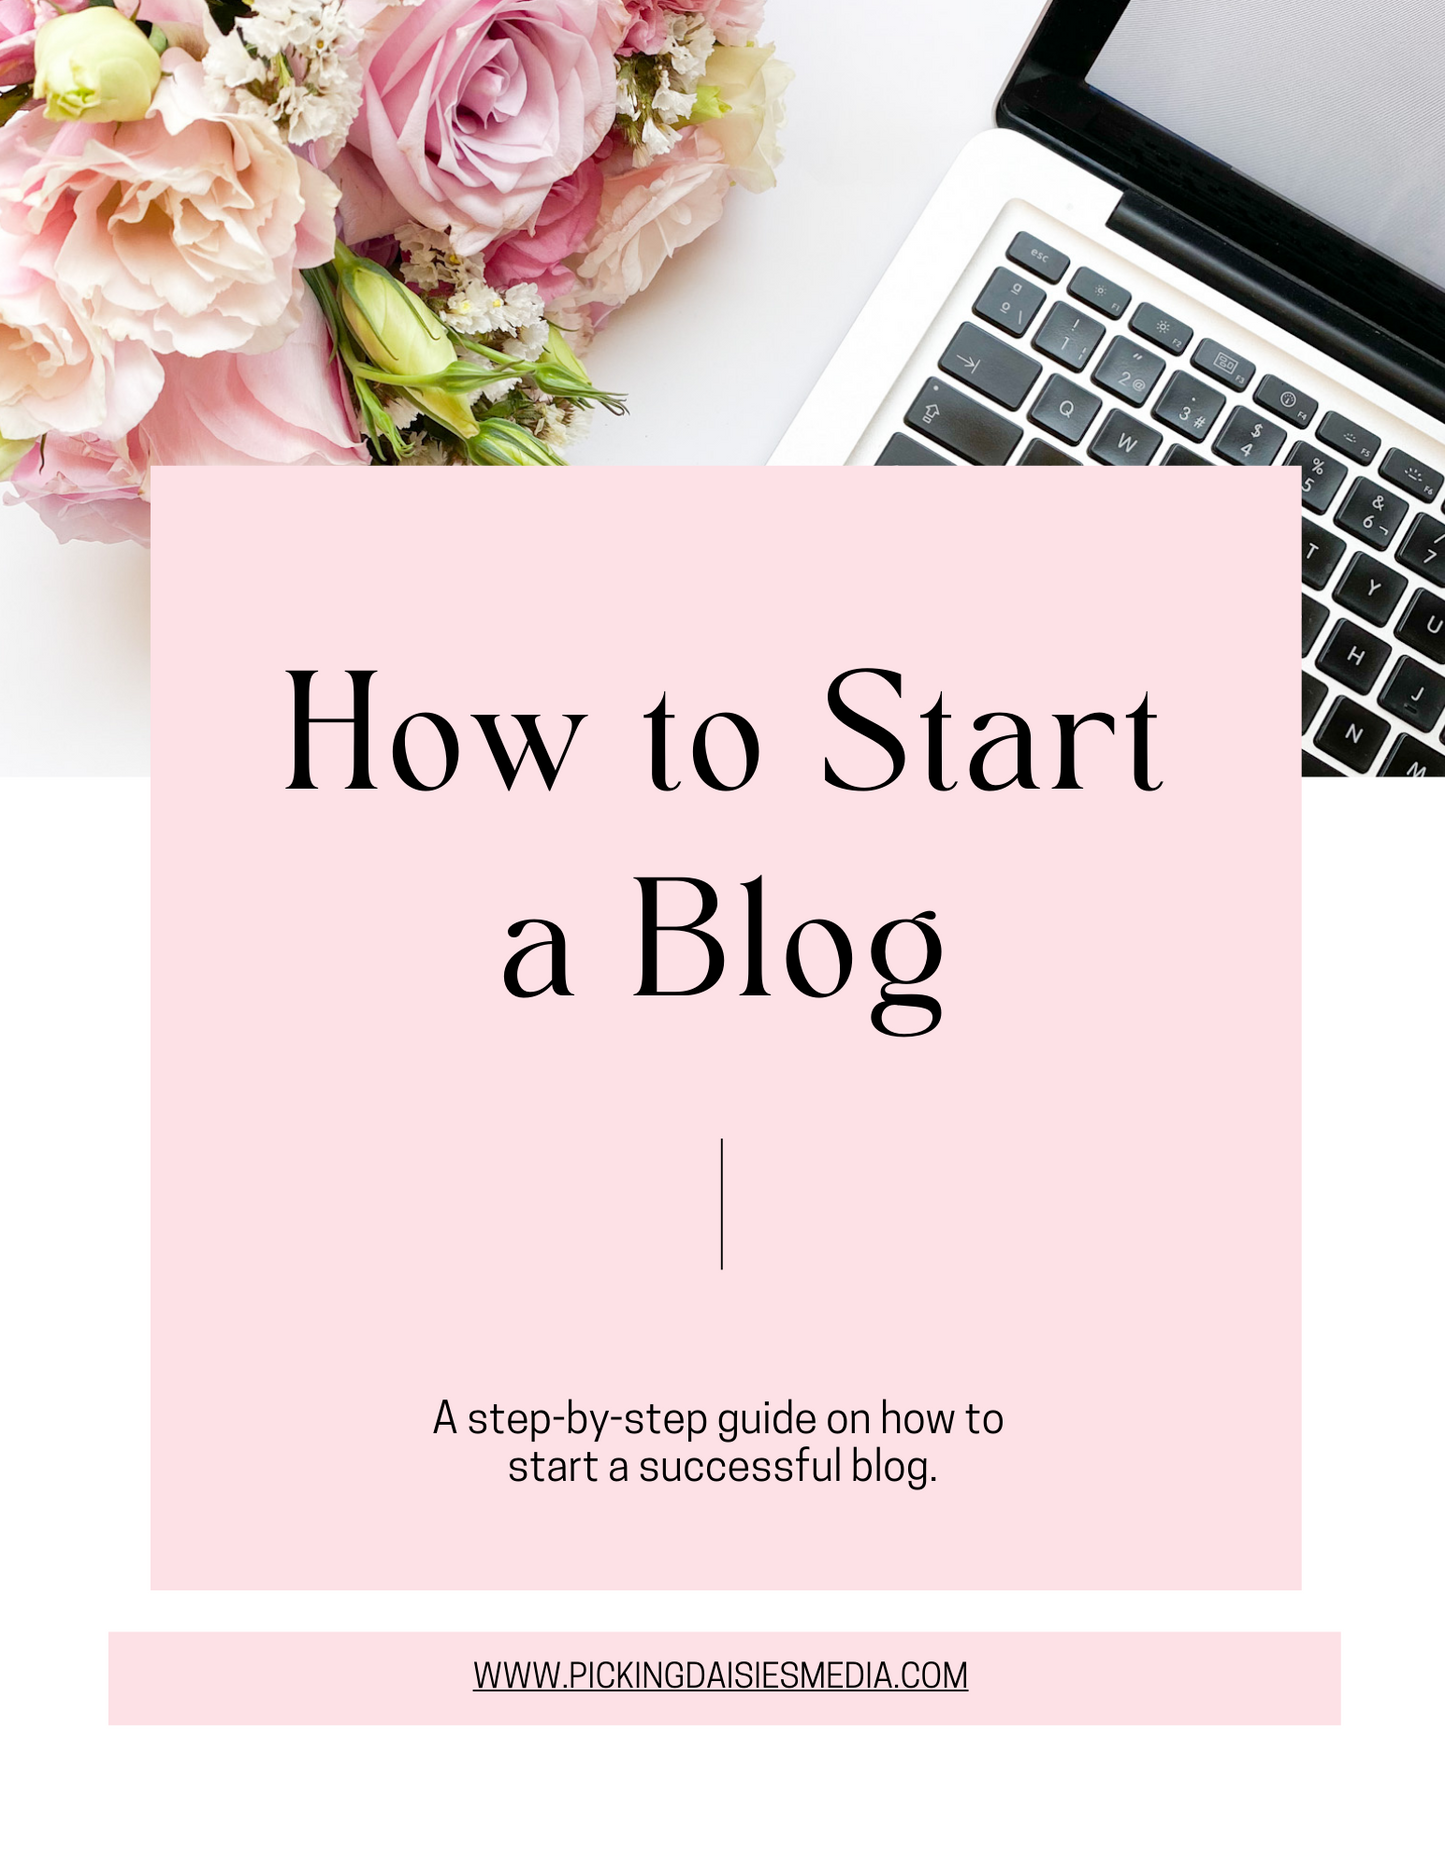 COURSE: How to Start a Blog